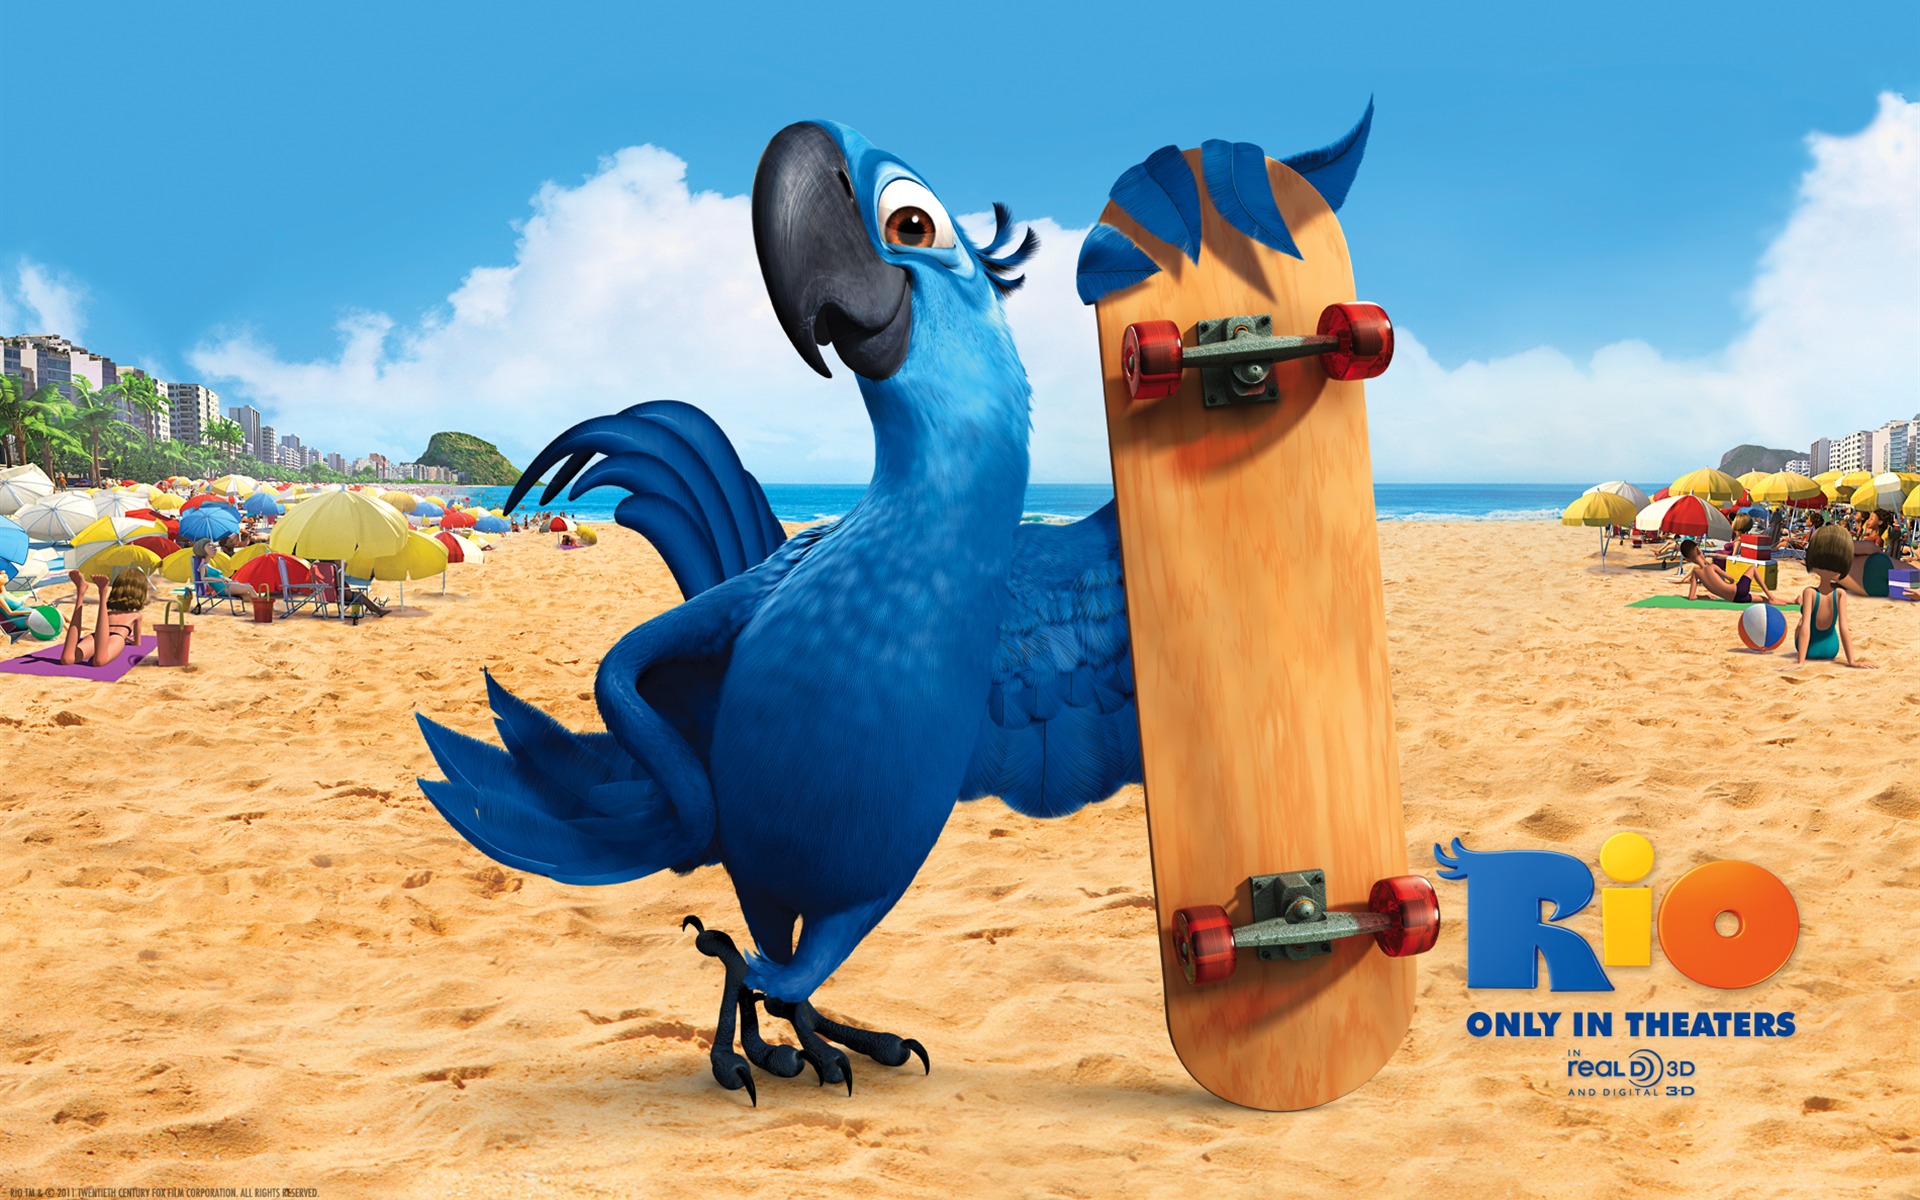 Rio 2011 wallpapers #3 - 1920x1200